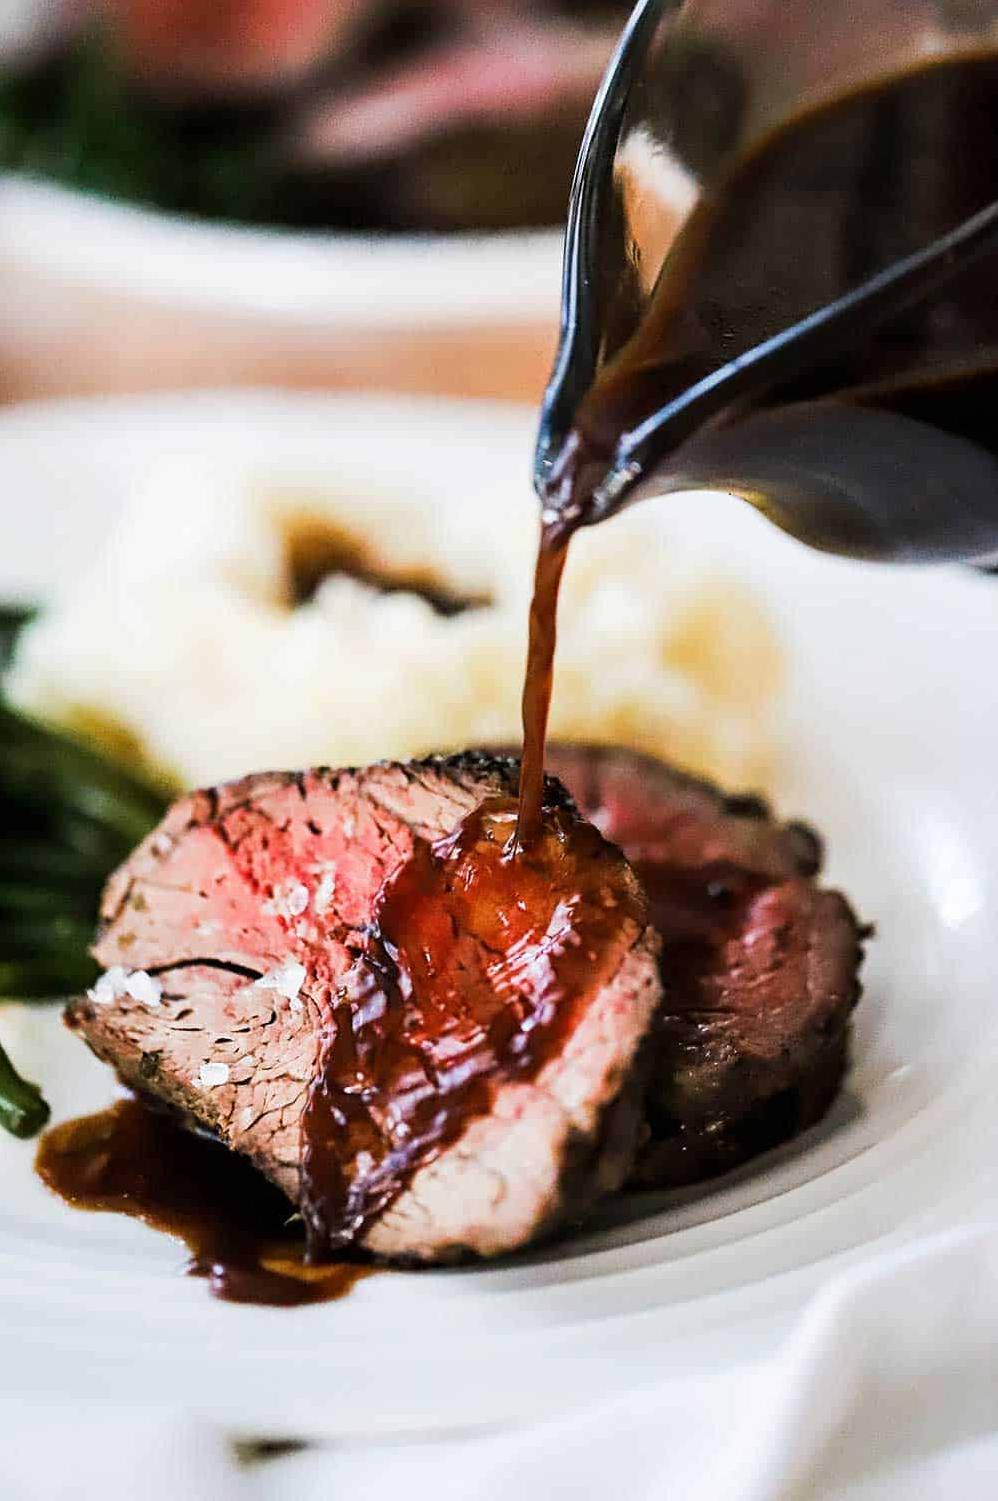  The perfect dinner party centerpiece - a beautifully seared beef tenderloin with a classic wine sauce.